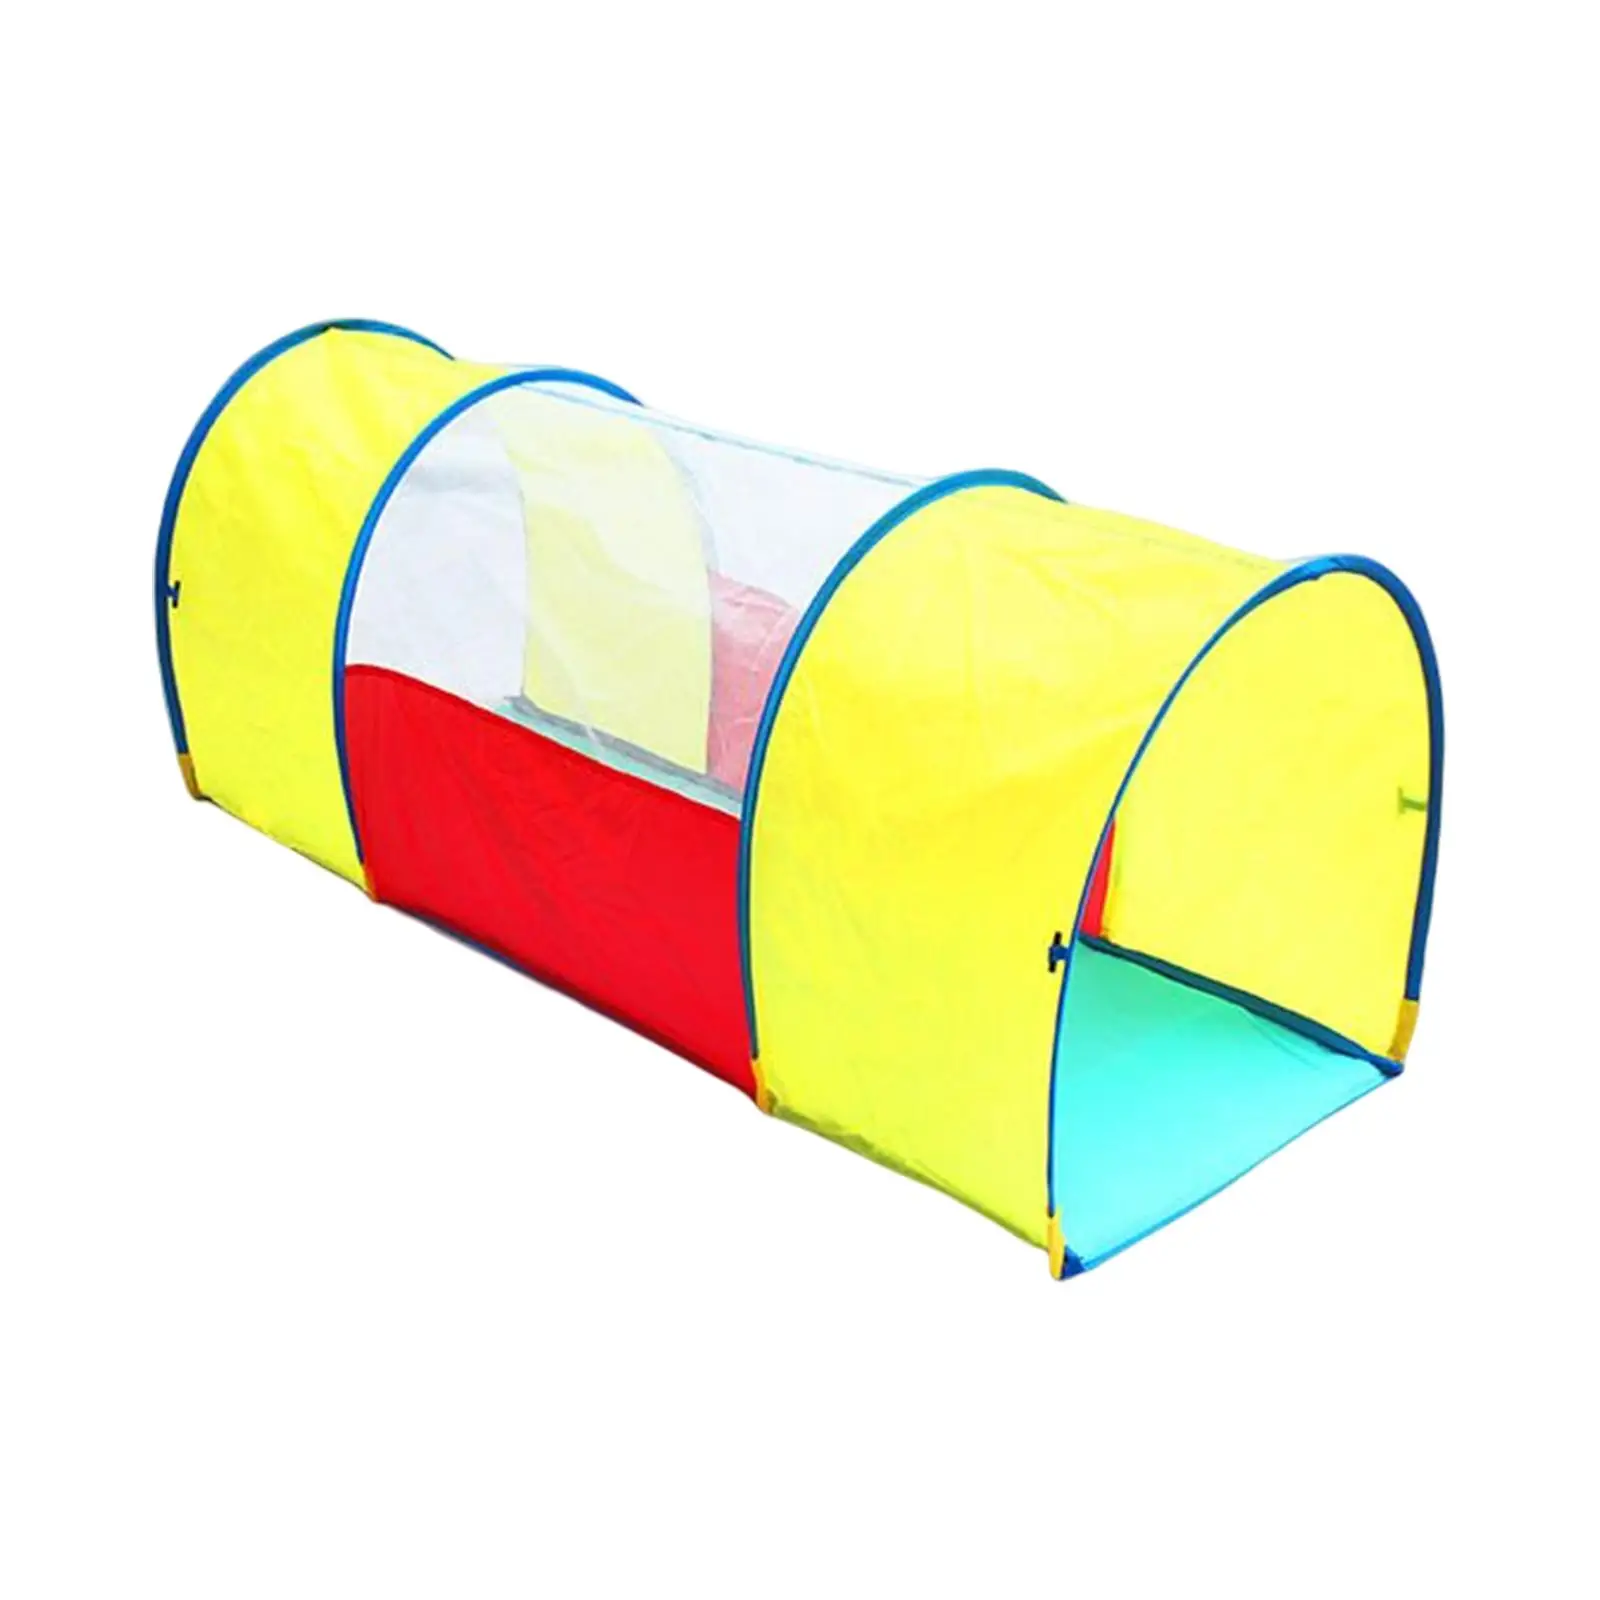 Kids Play Tunnel Tent Indoor Outdoor Toy for Toddlers Children Infants